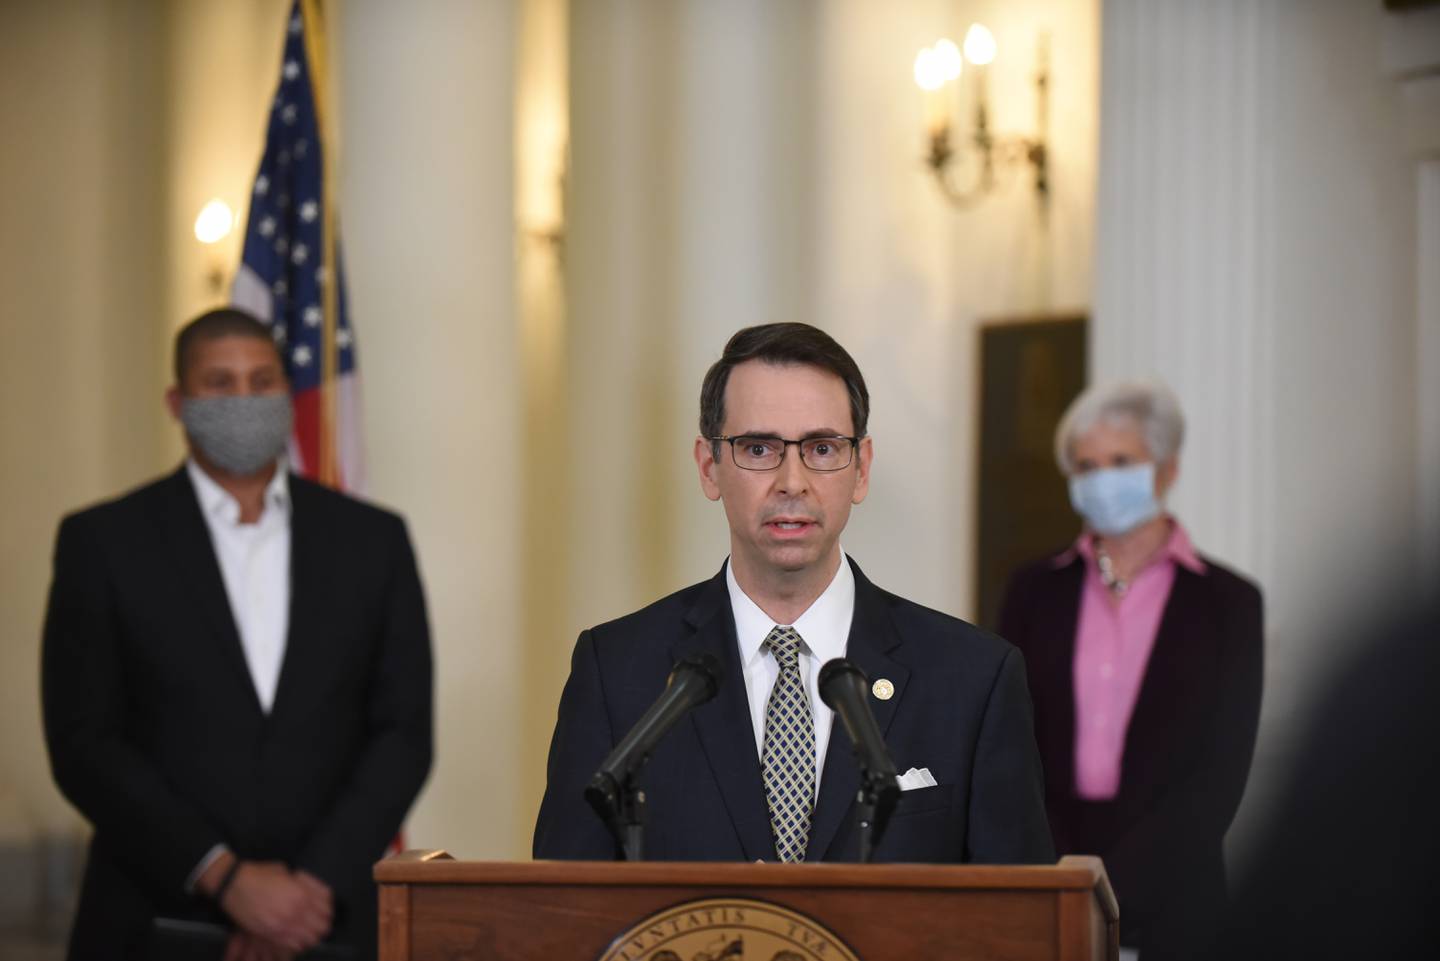 Roy McGrath speaks during a coronavirus press conference at the Maryland State House on April 15, 2020. McGrath, who eventually became Gov. Larry Hogan's chief of staff, is facing state and federal criminal charges related to a "severance" payment he received from the Maryland Environmental Service when he left to join Hogan's office.